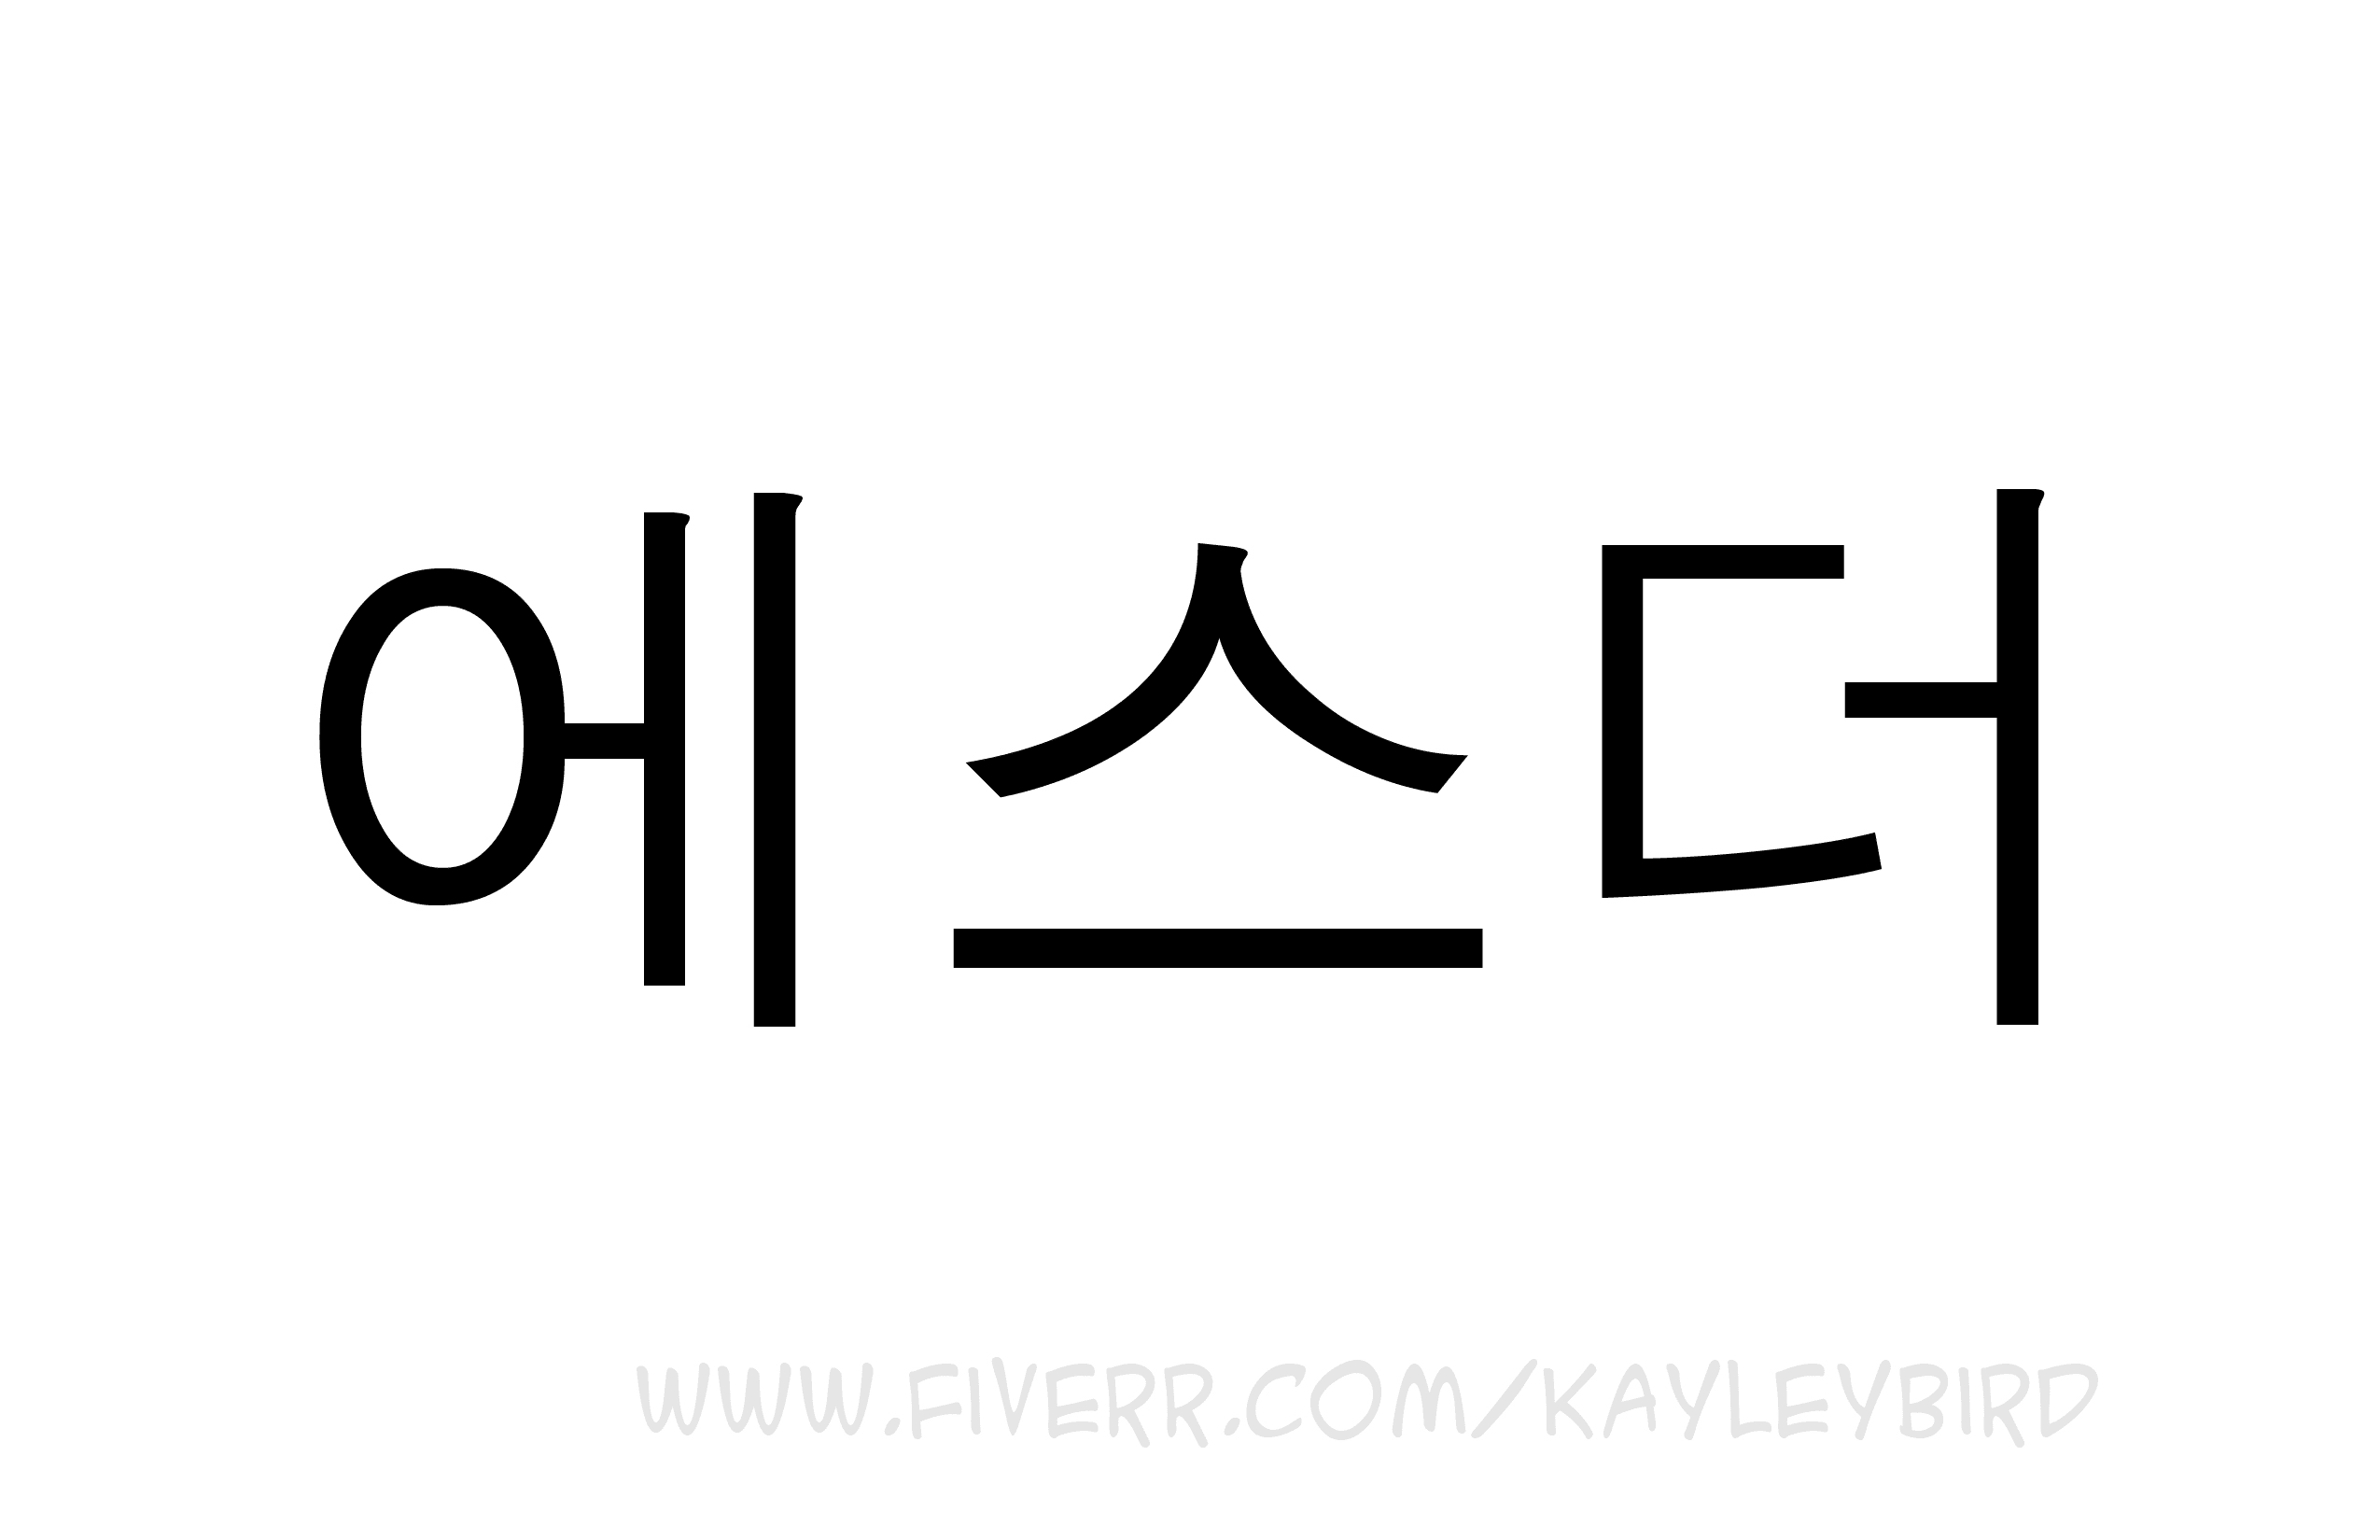 Write your name in korean by Kayleybird  Fiverr